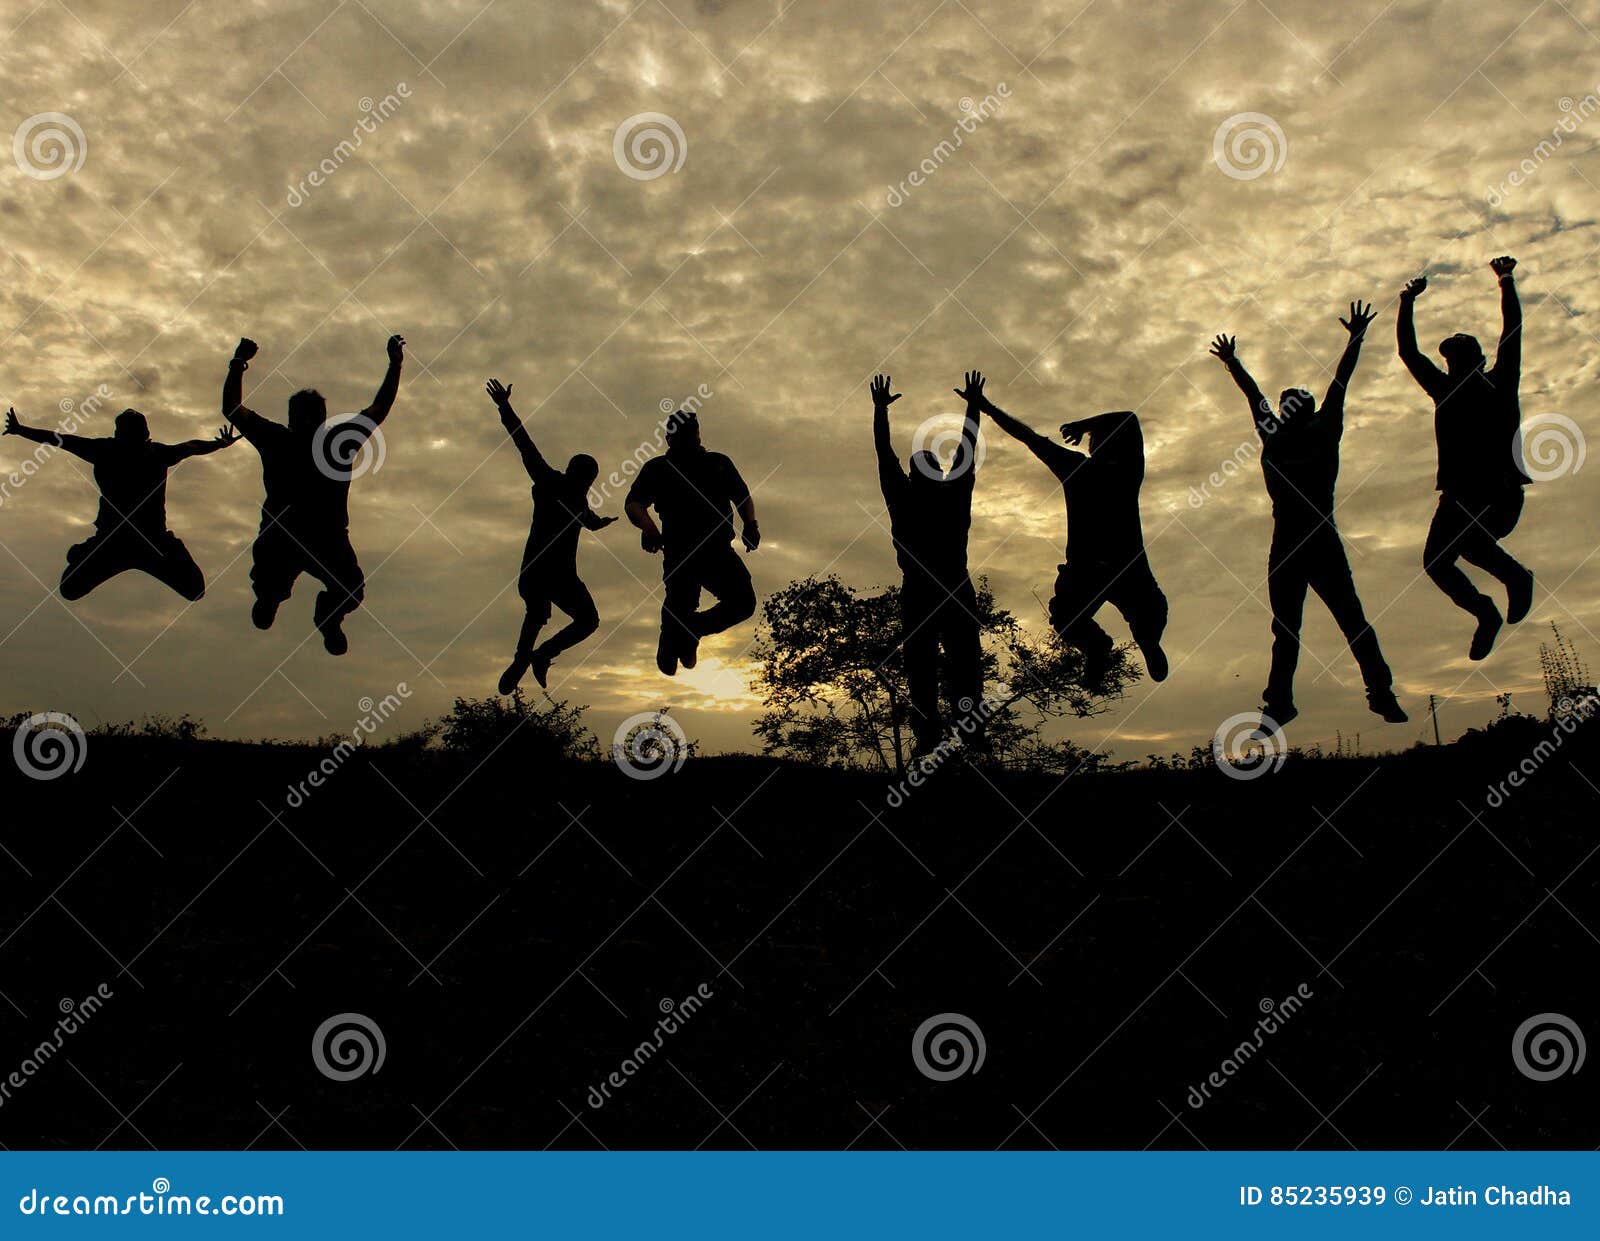 silhouette - jumping with joy